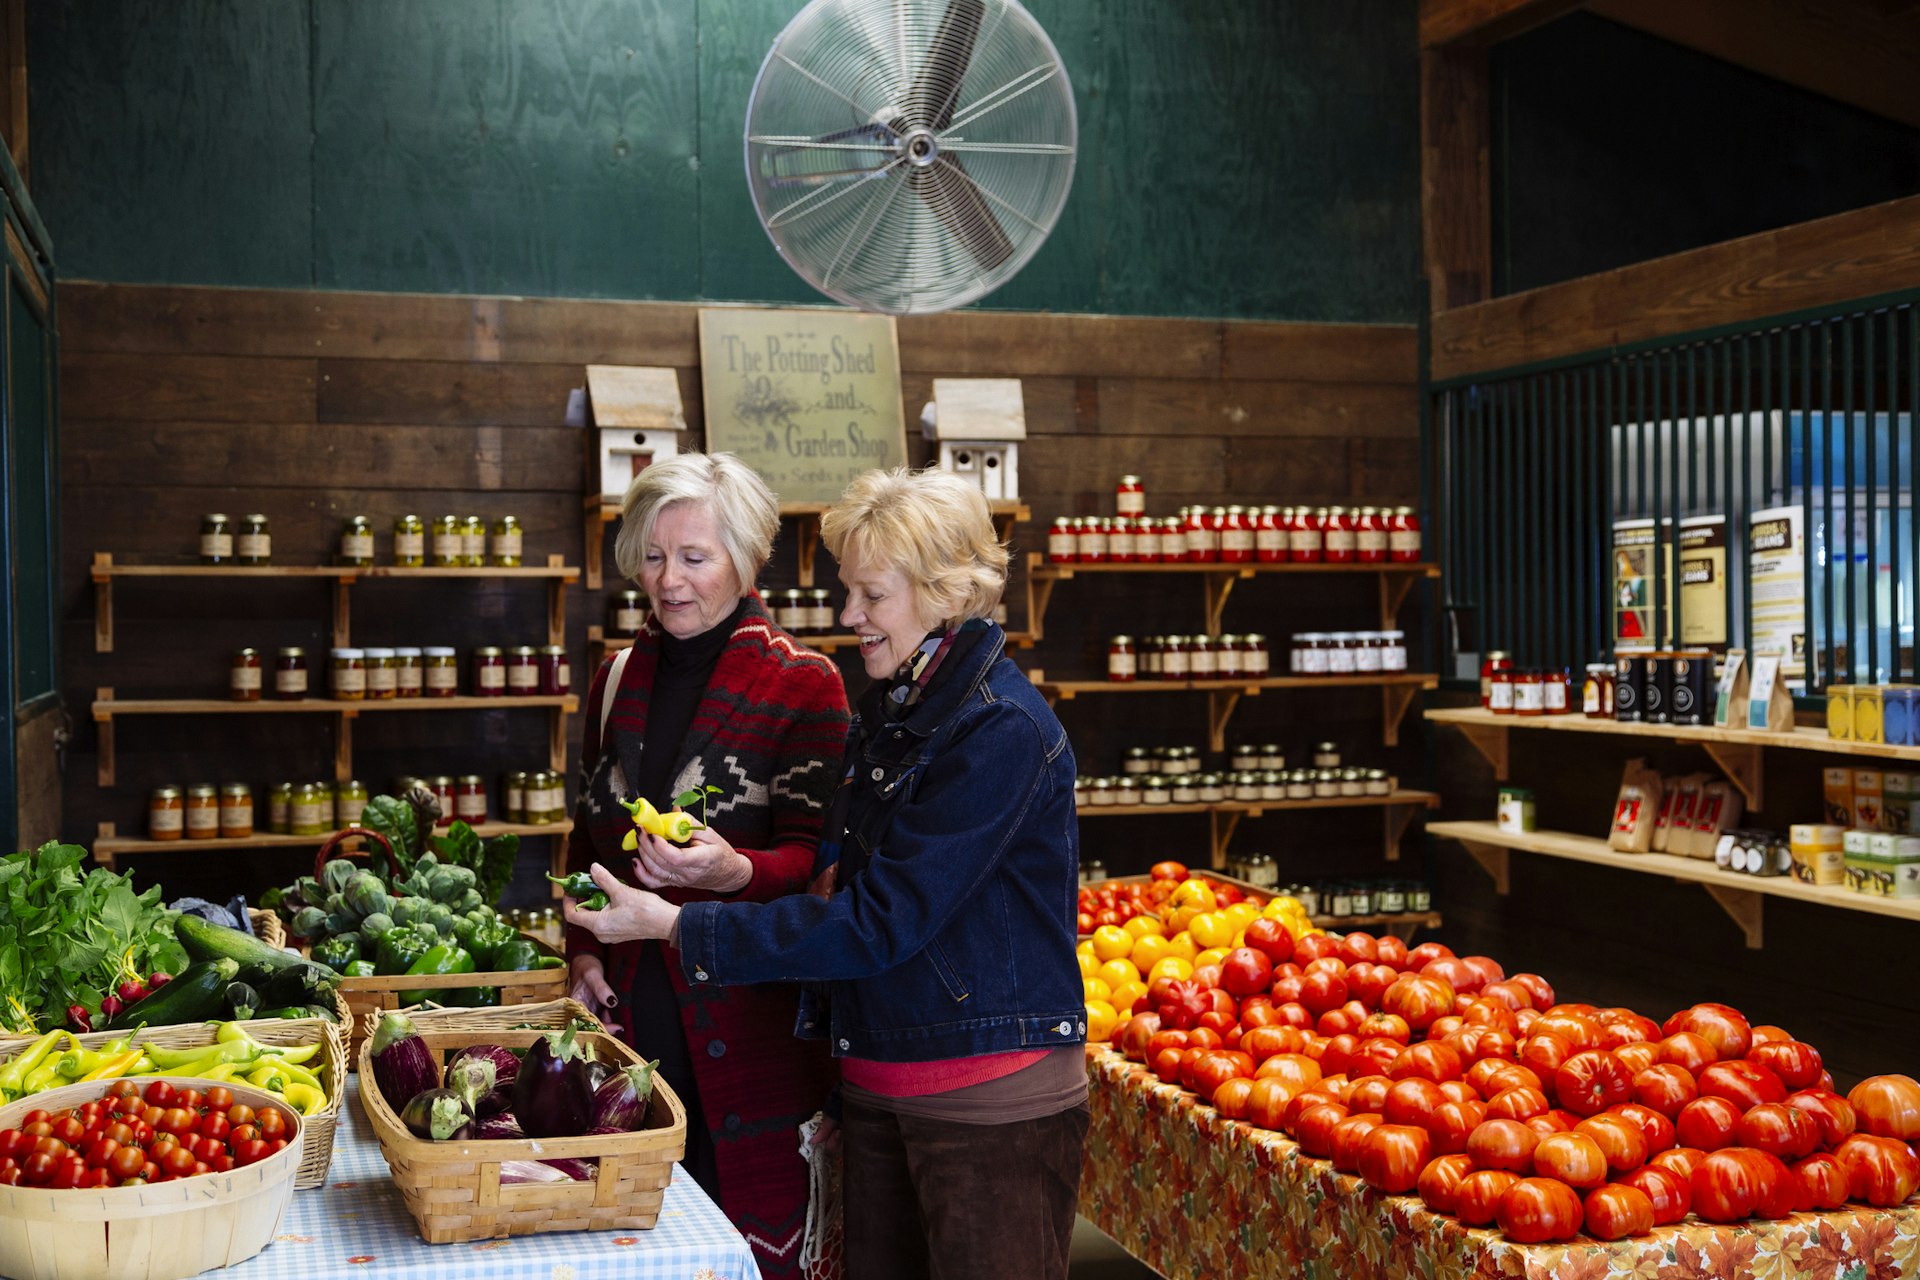 Two women browse for goods in a farm store with walls lined with produce